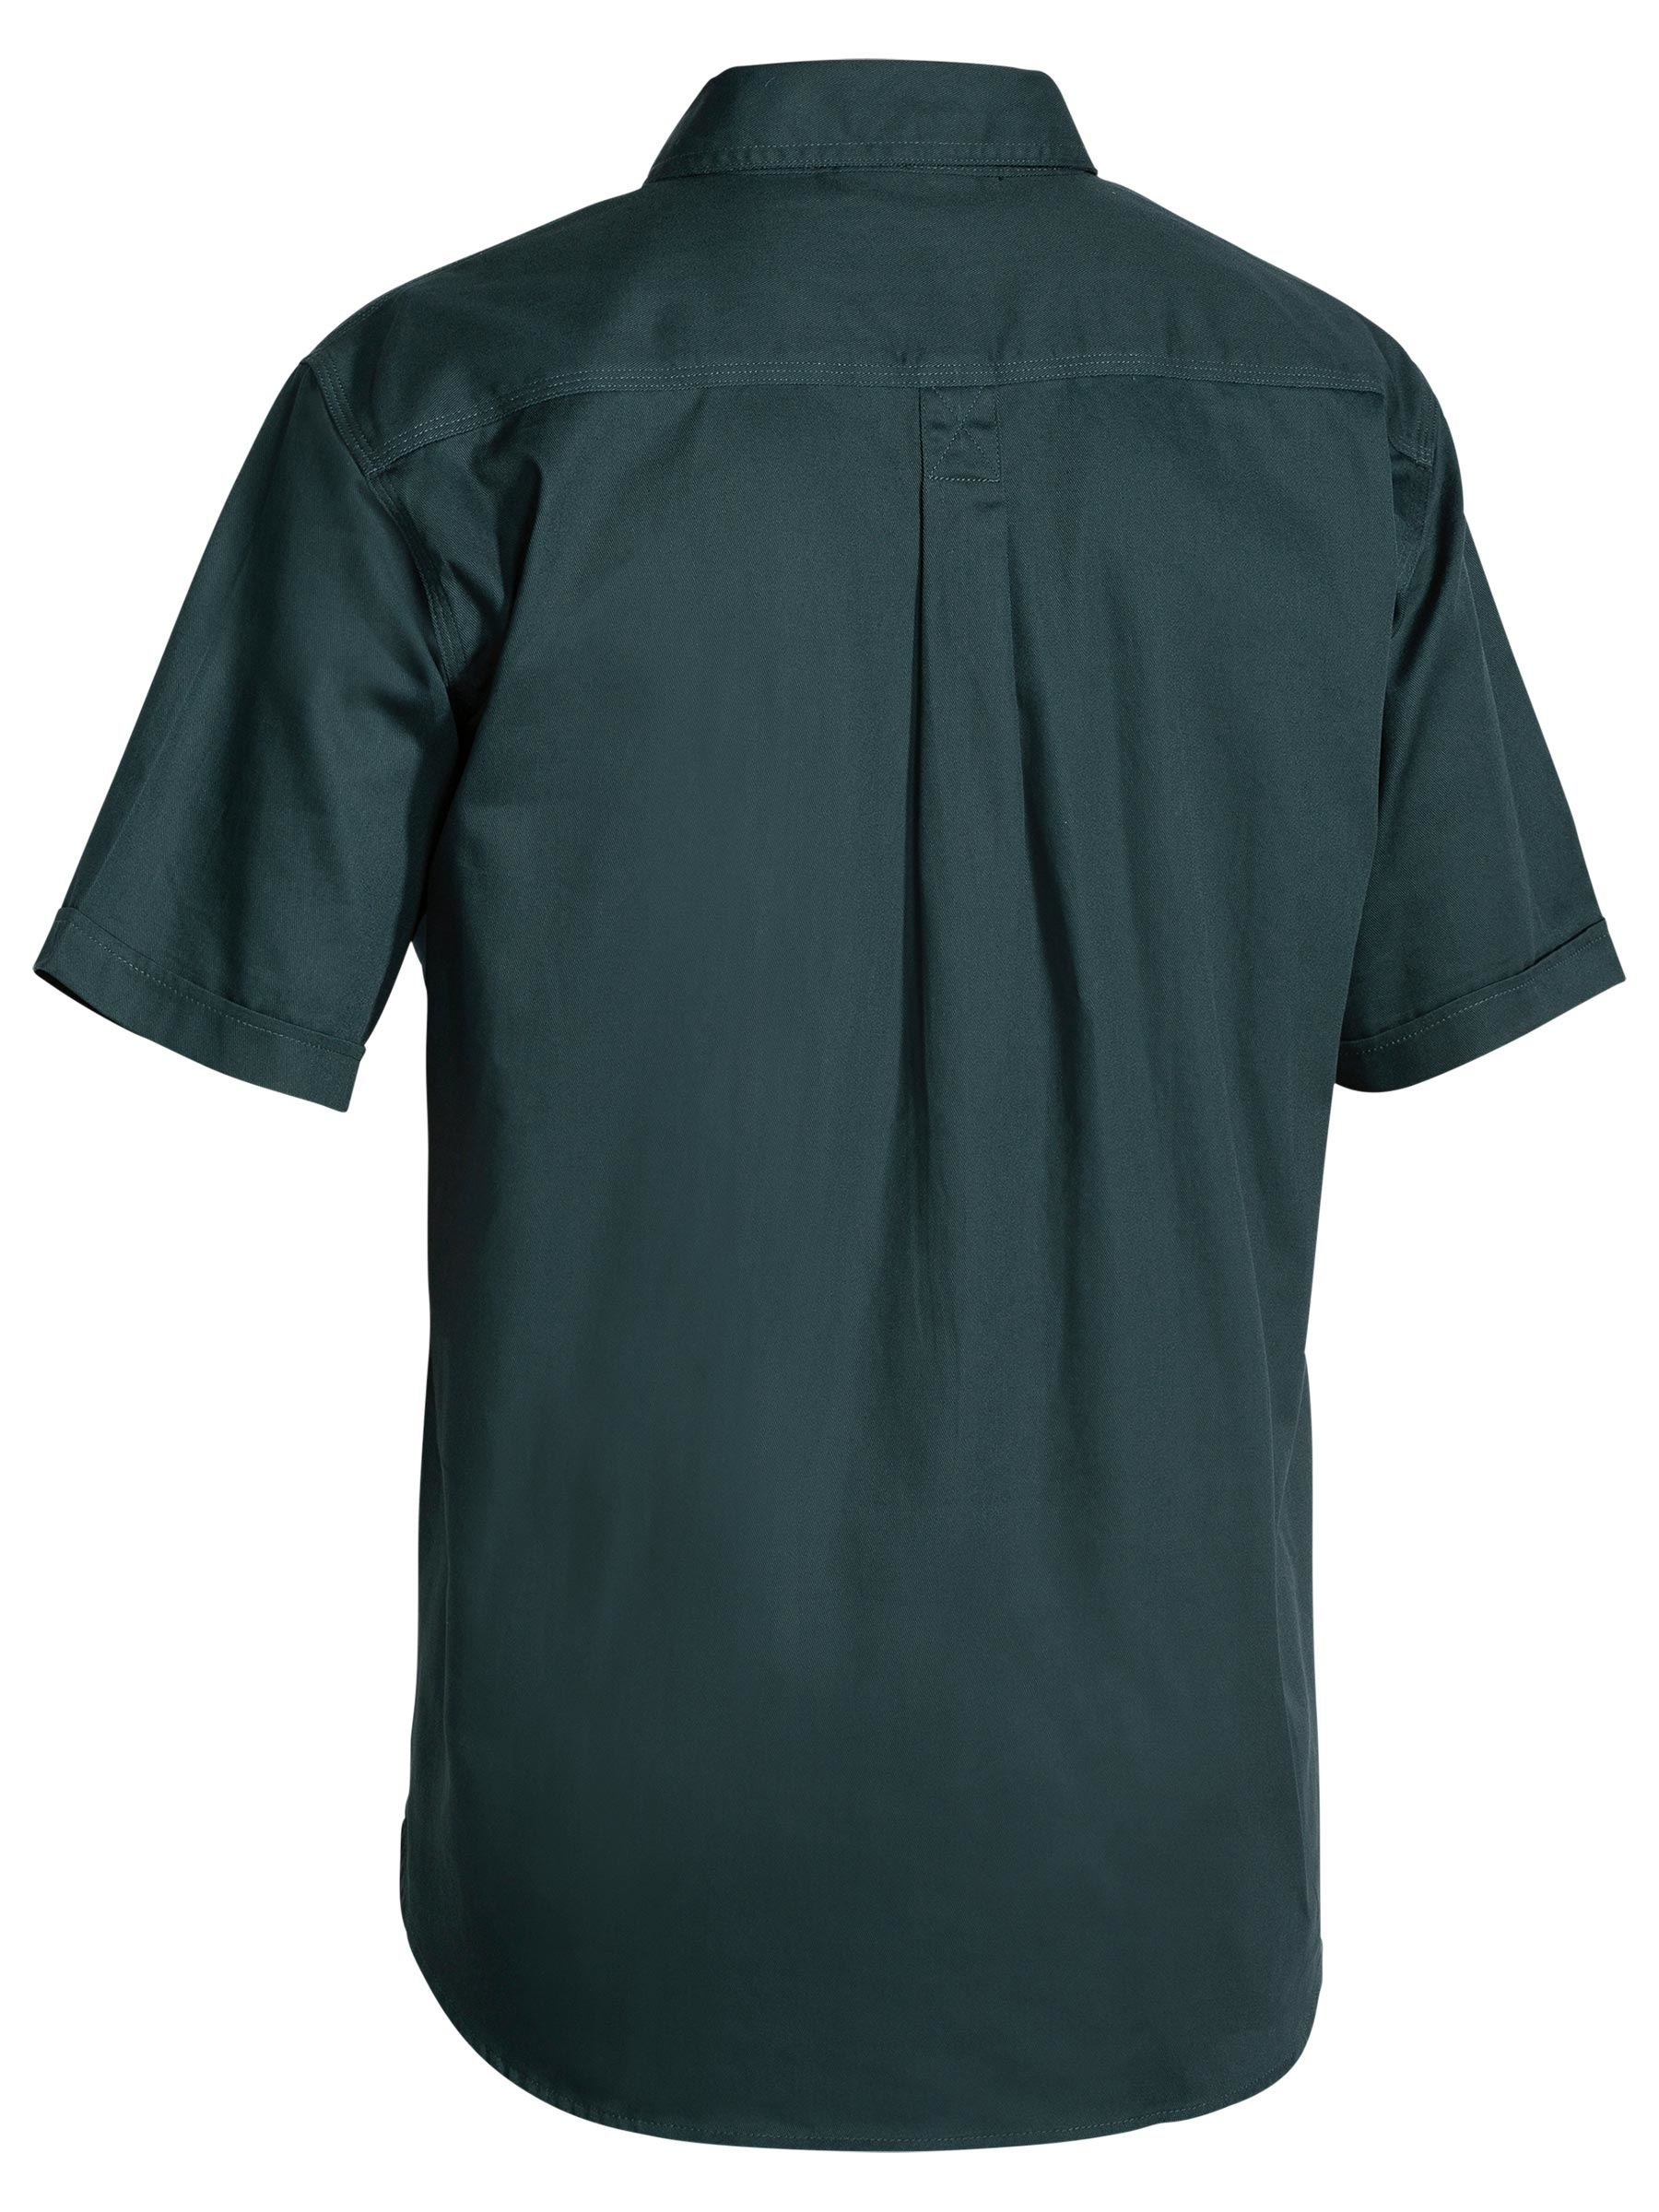 Closed Front Cotton Drill Short Sleeve Shirt - BSC1433 - Bisley Workwear